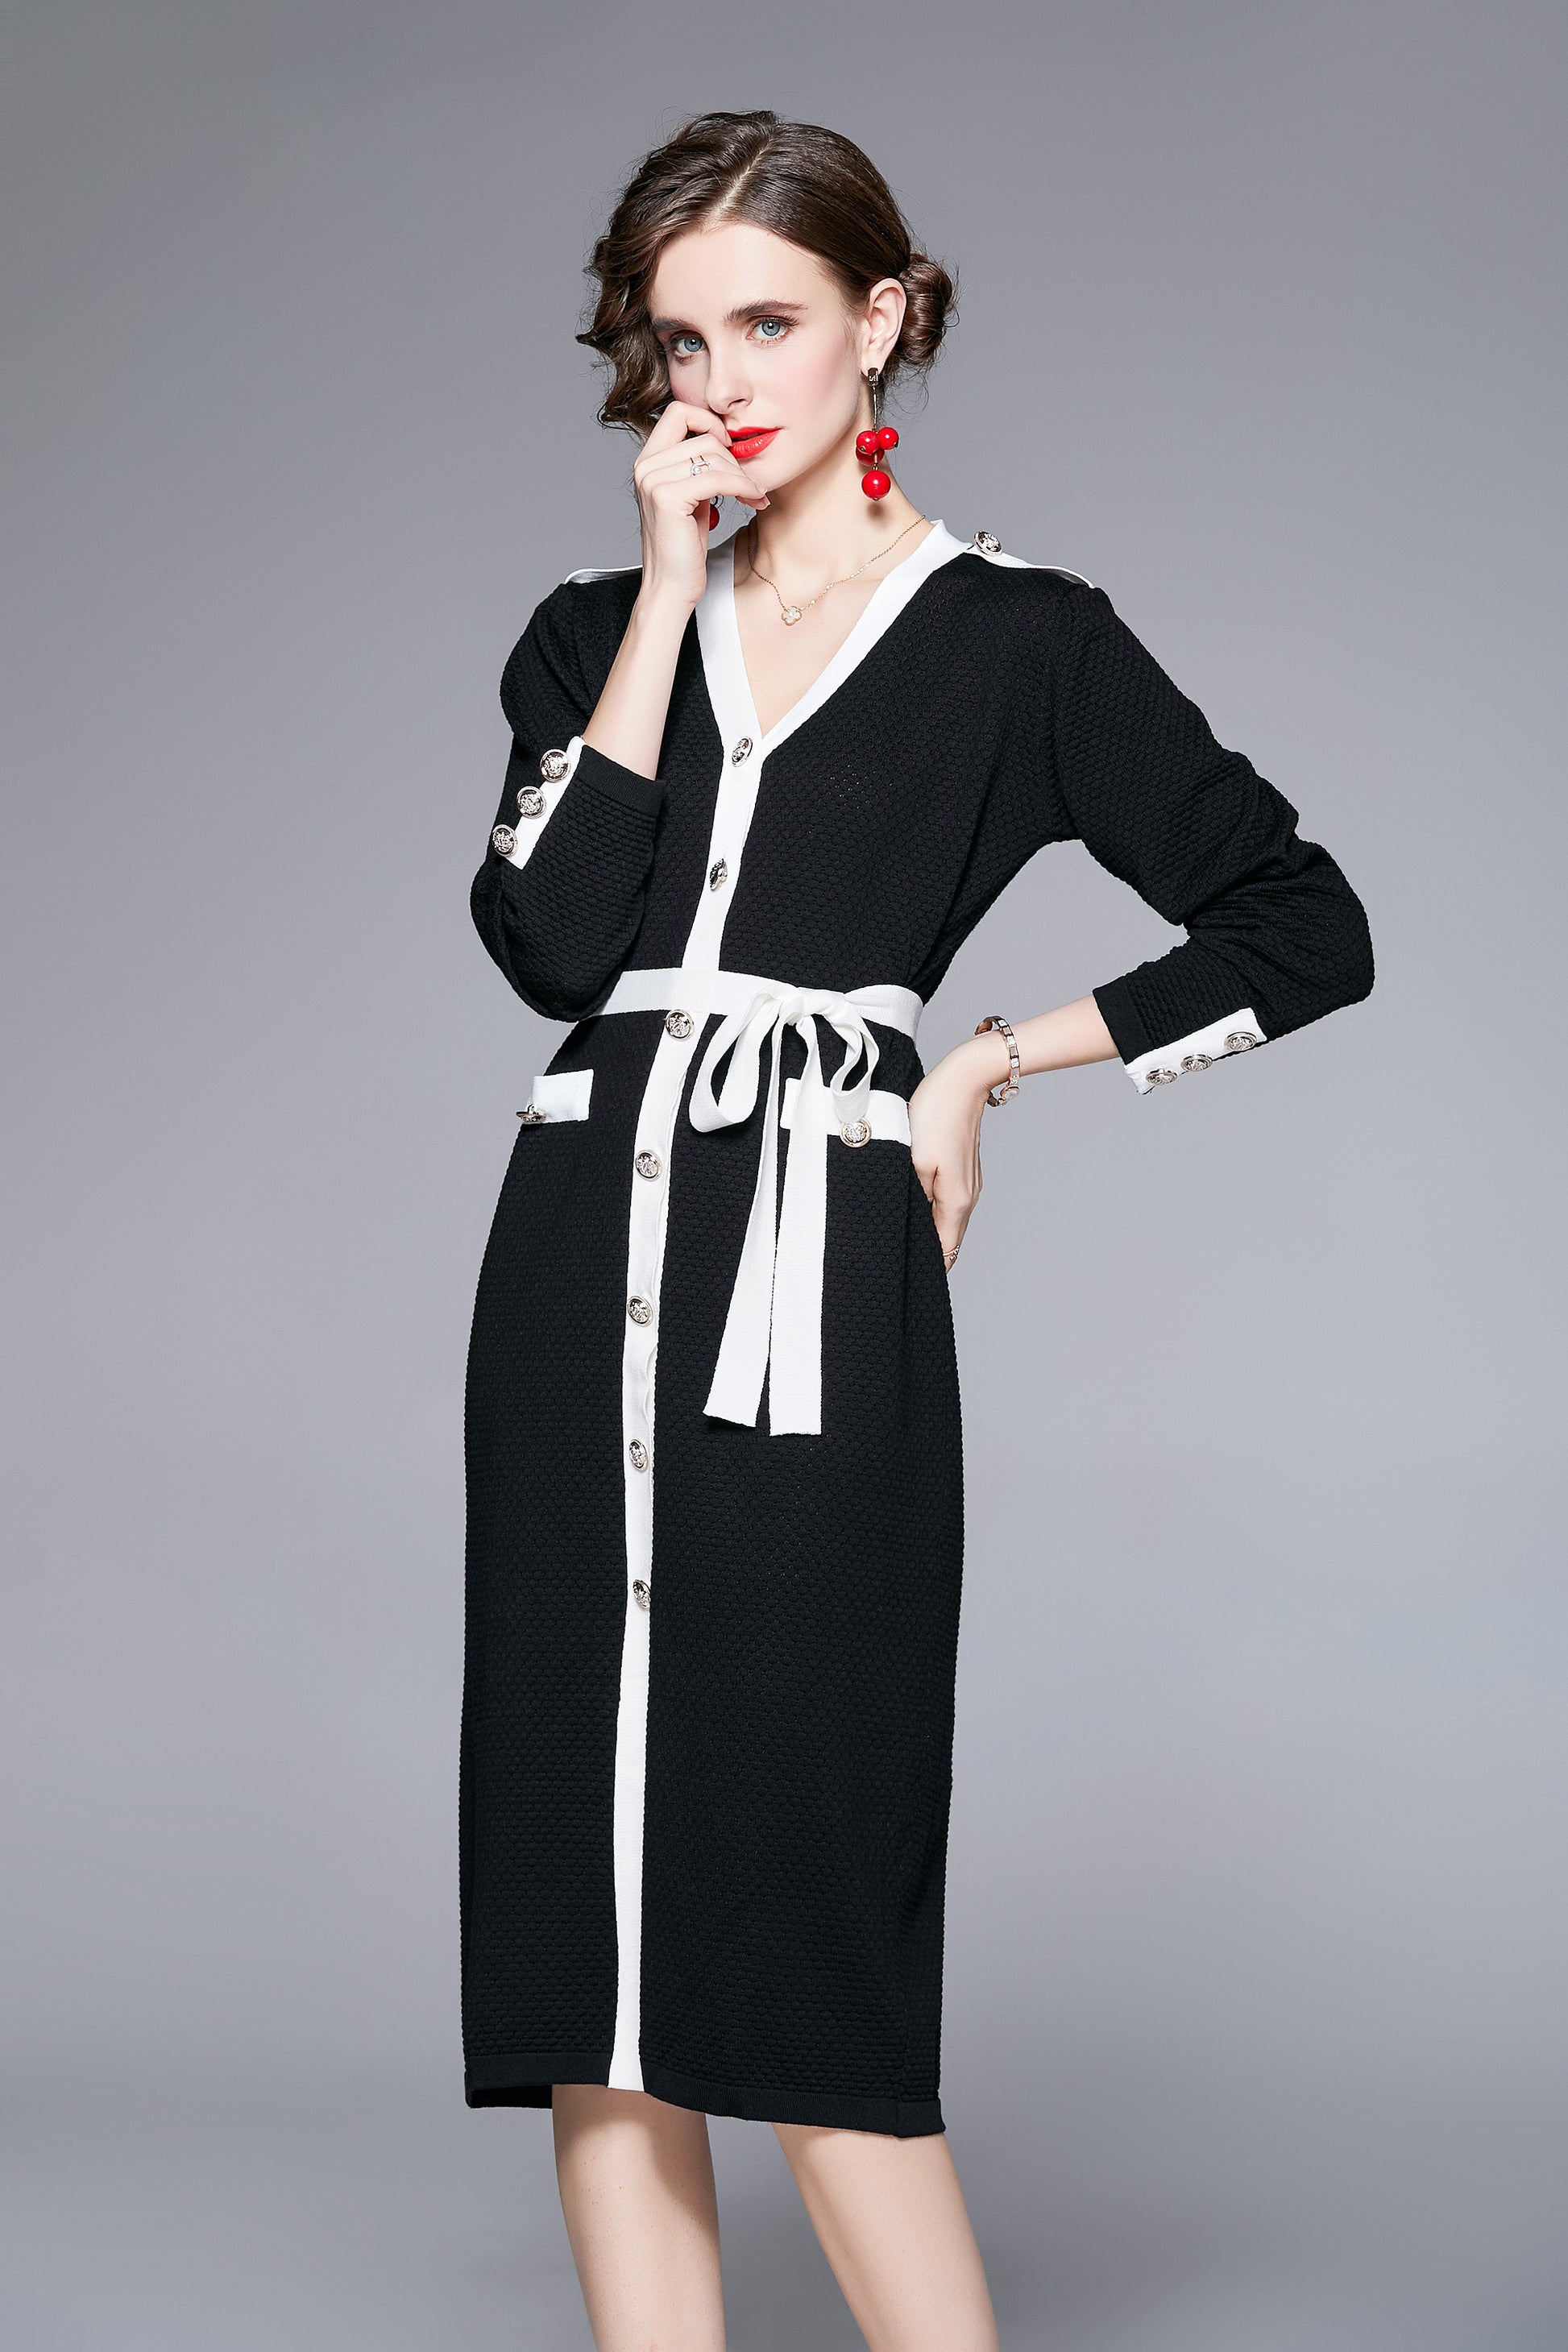 V-neck Front Button and Belt Knitted Dress - LAI MENG FIVE CATS